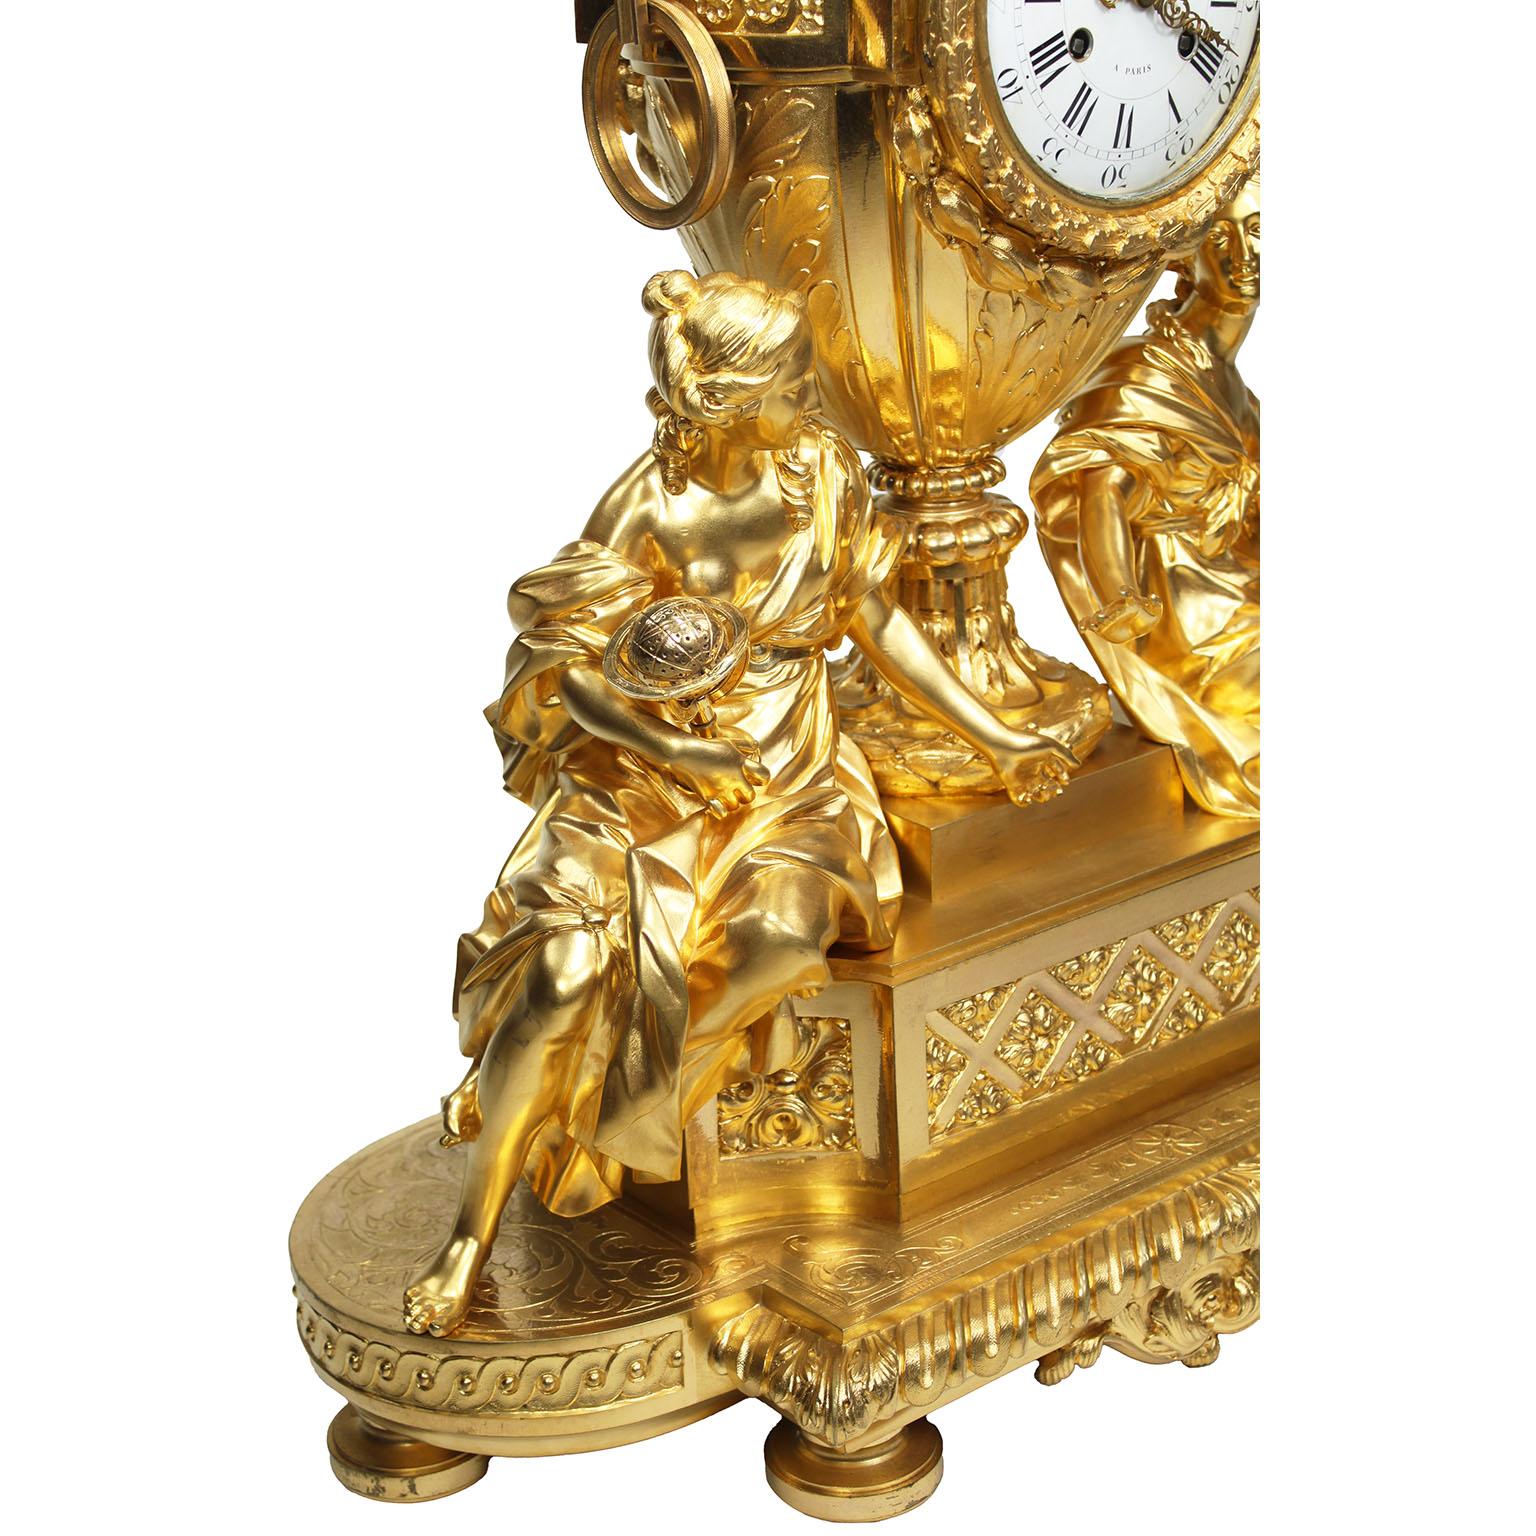 19th Century Louis XVI Style Gilt-Bronze Mantel Clock by Henri Picard & Fedinand Barbedienne For Sale